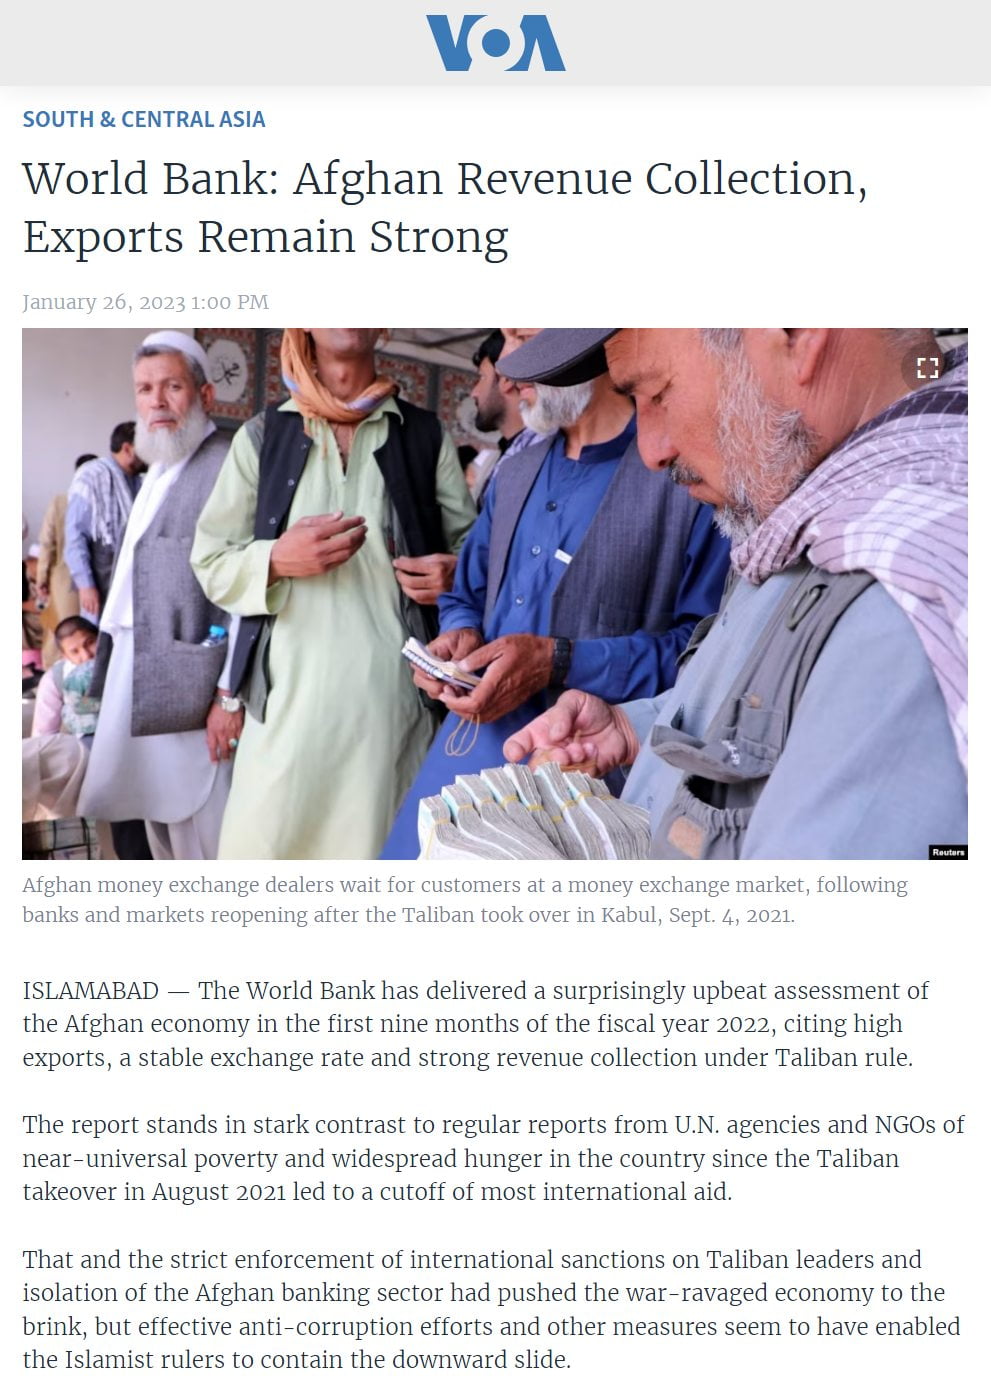 Afghan revenue collection, exports remain strong, but they need...